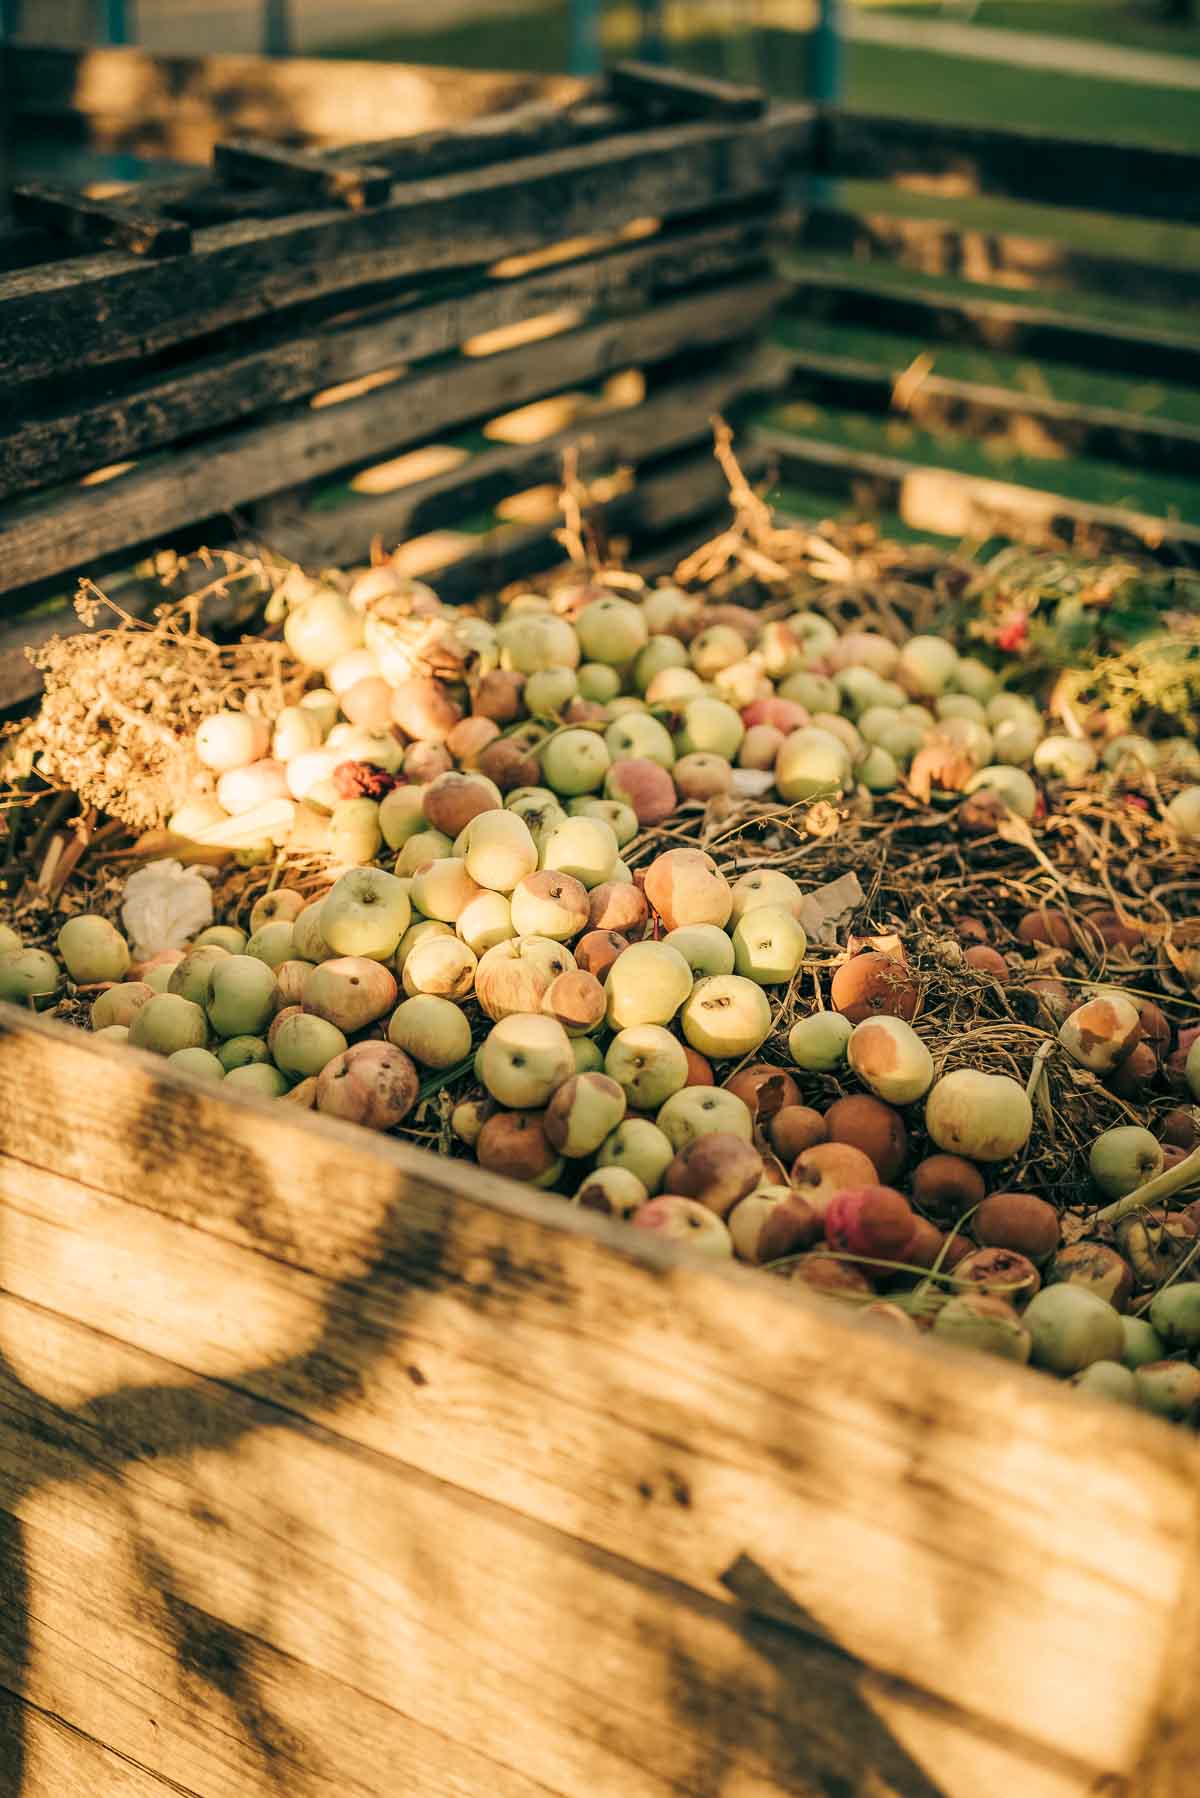 A wooden compost bin full of mixed organic materials and apples that can be used as mulch once it breaks down.